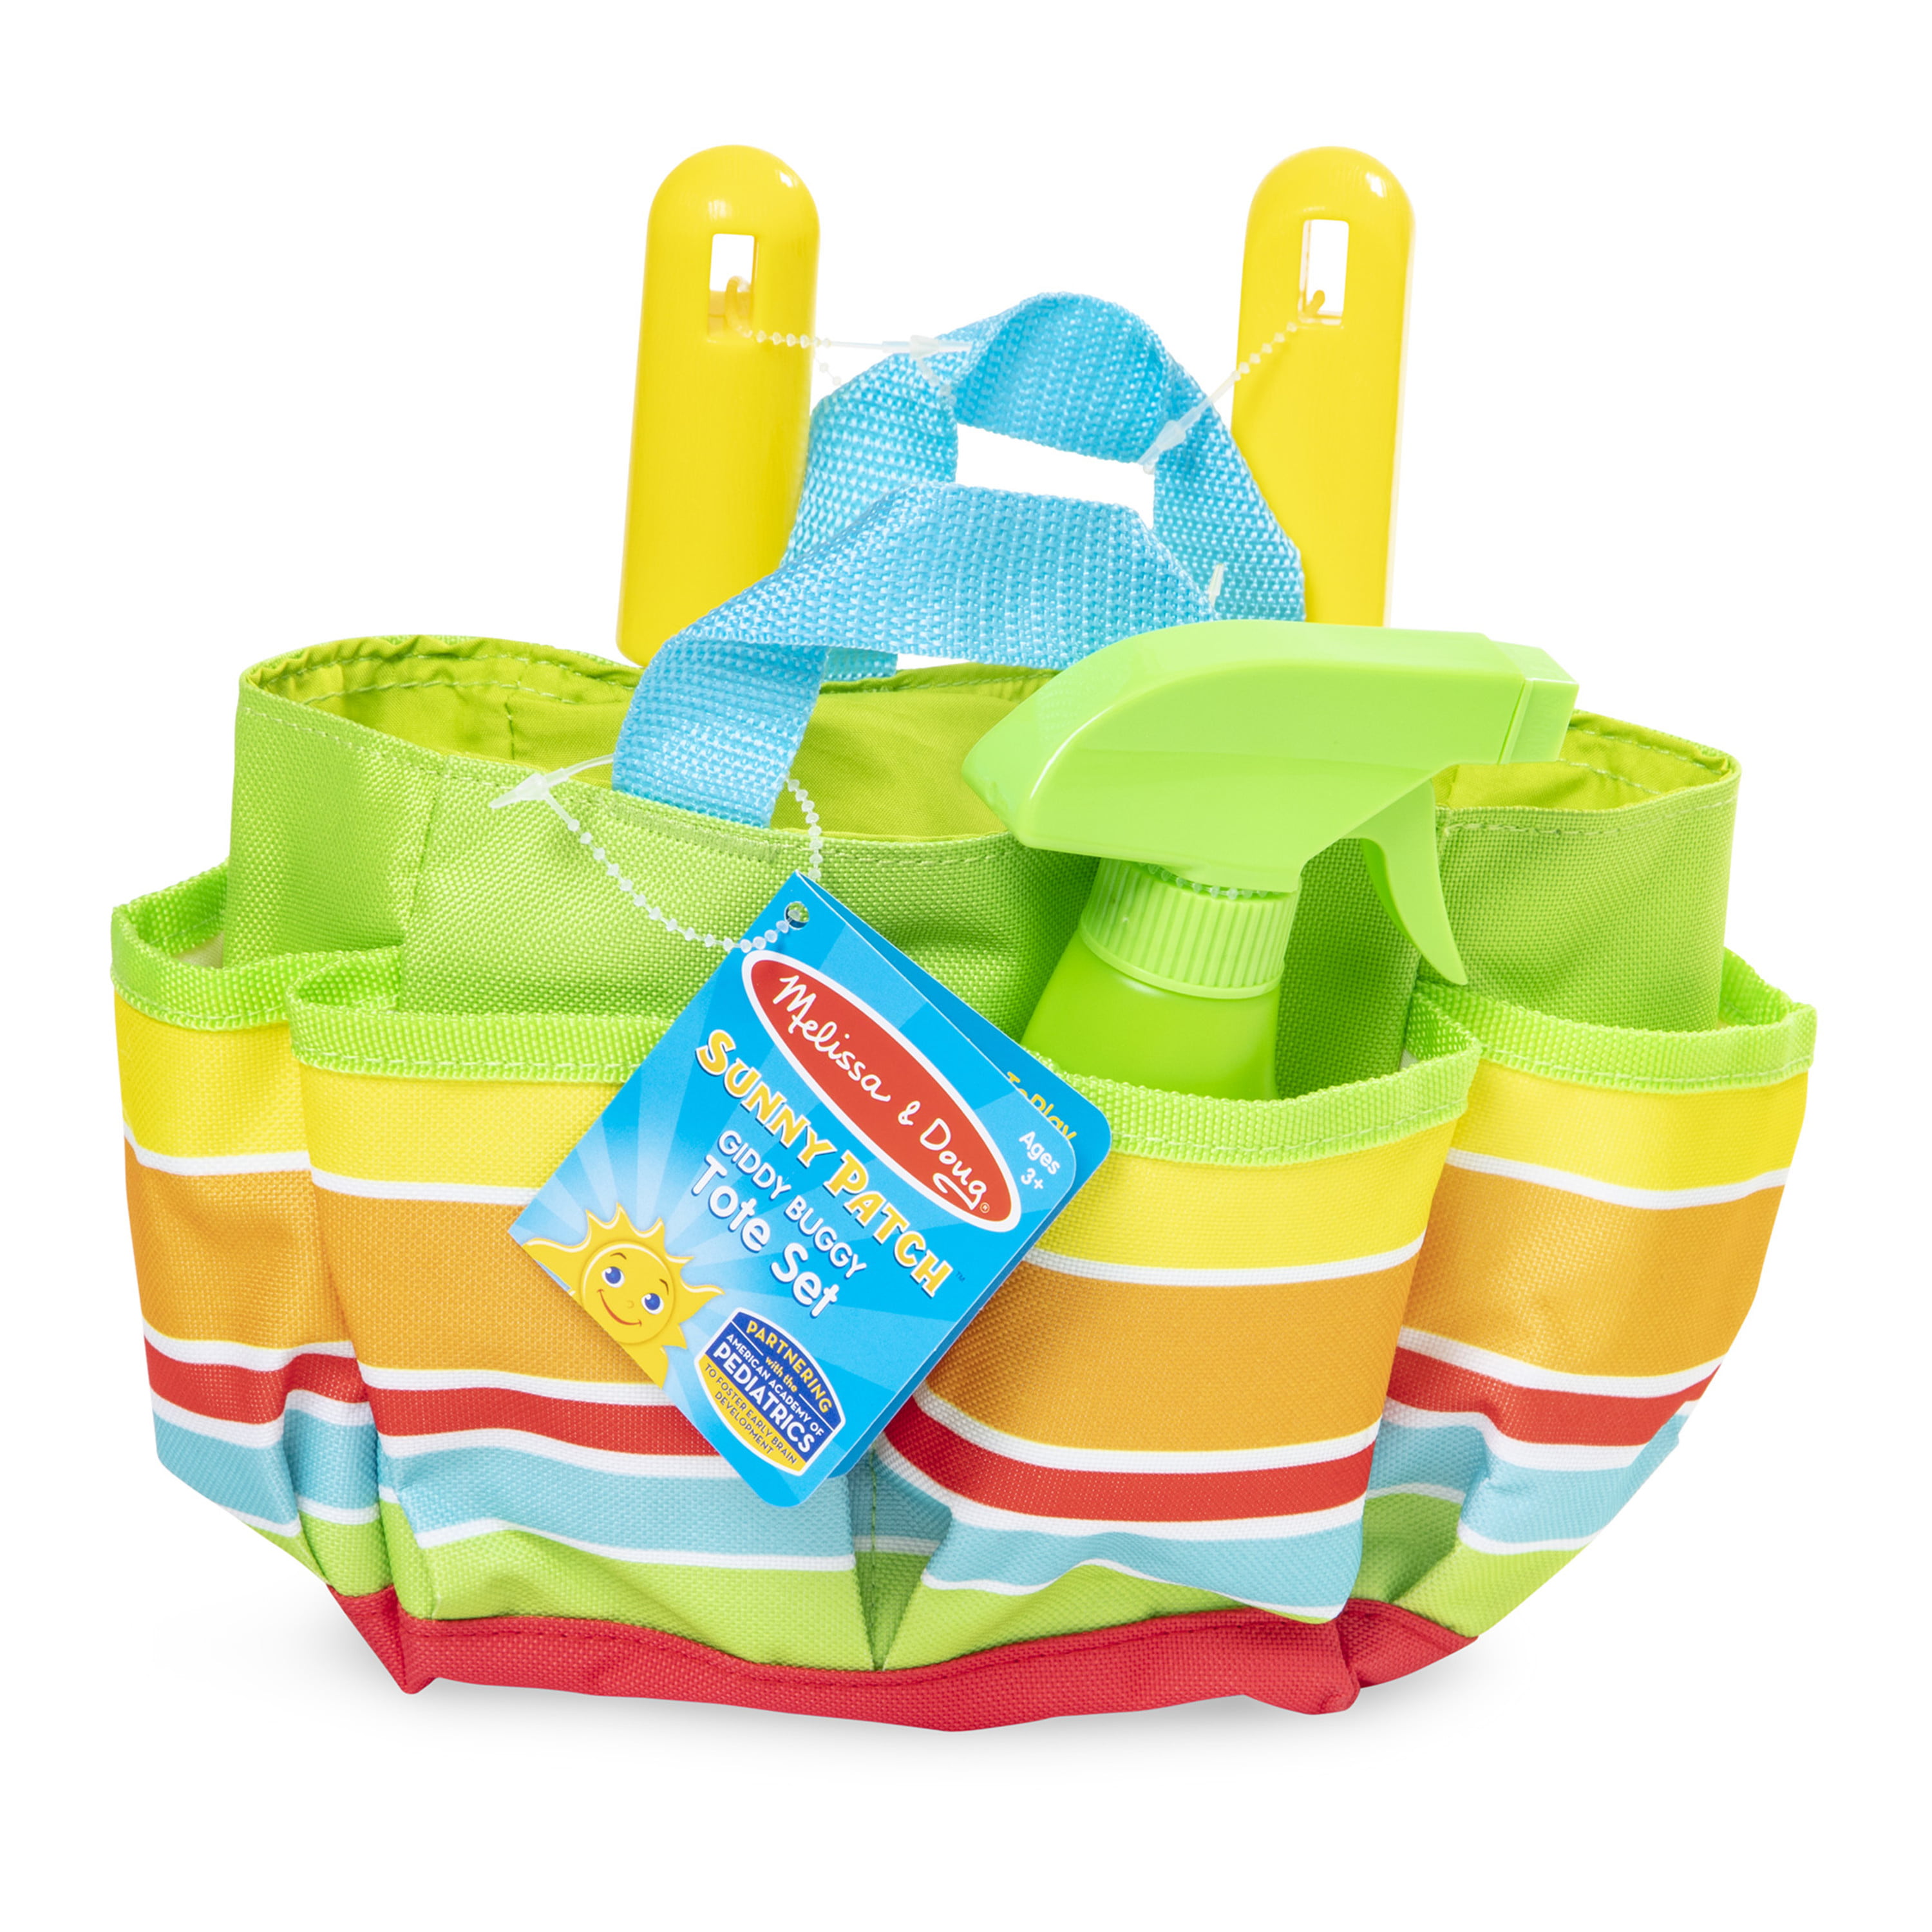 Details about   NEW Melissa & Doug Sunny Patch Giddy Buggy Gardening TOTE SET tools sprayer 